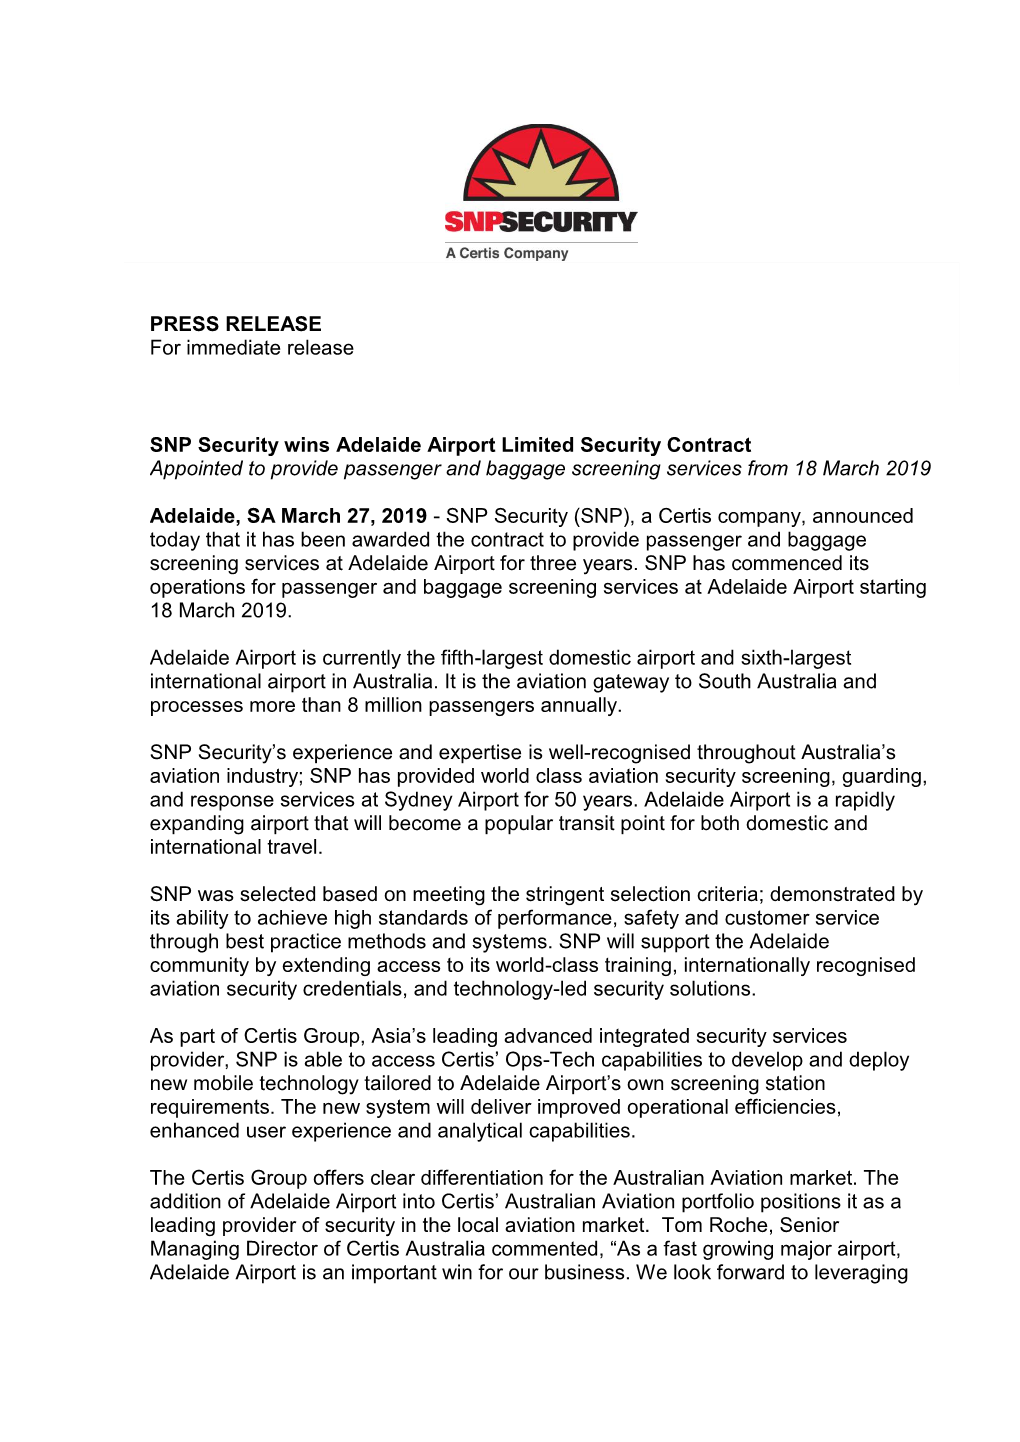 PRESS RELEASE for Immediate Release SNP Security Wins